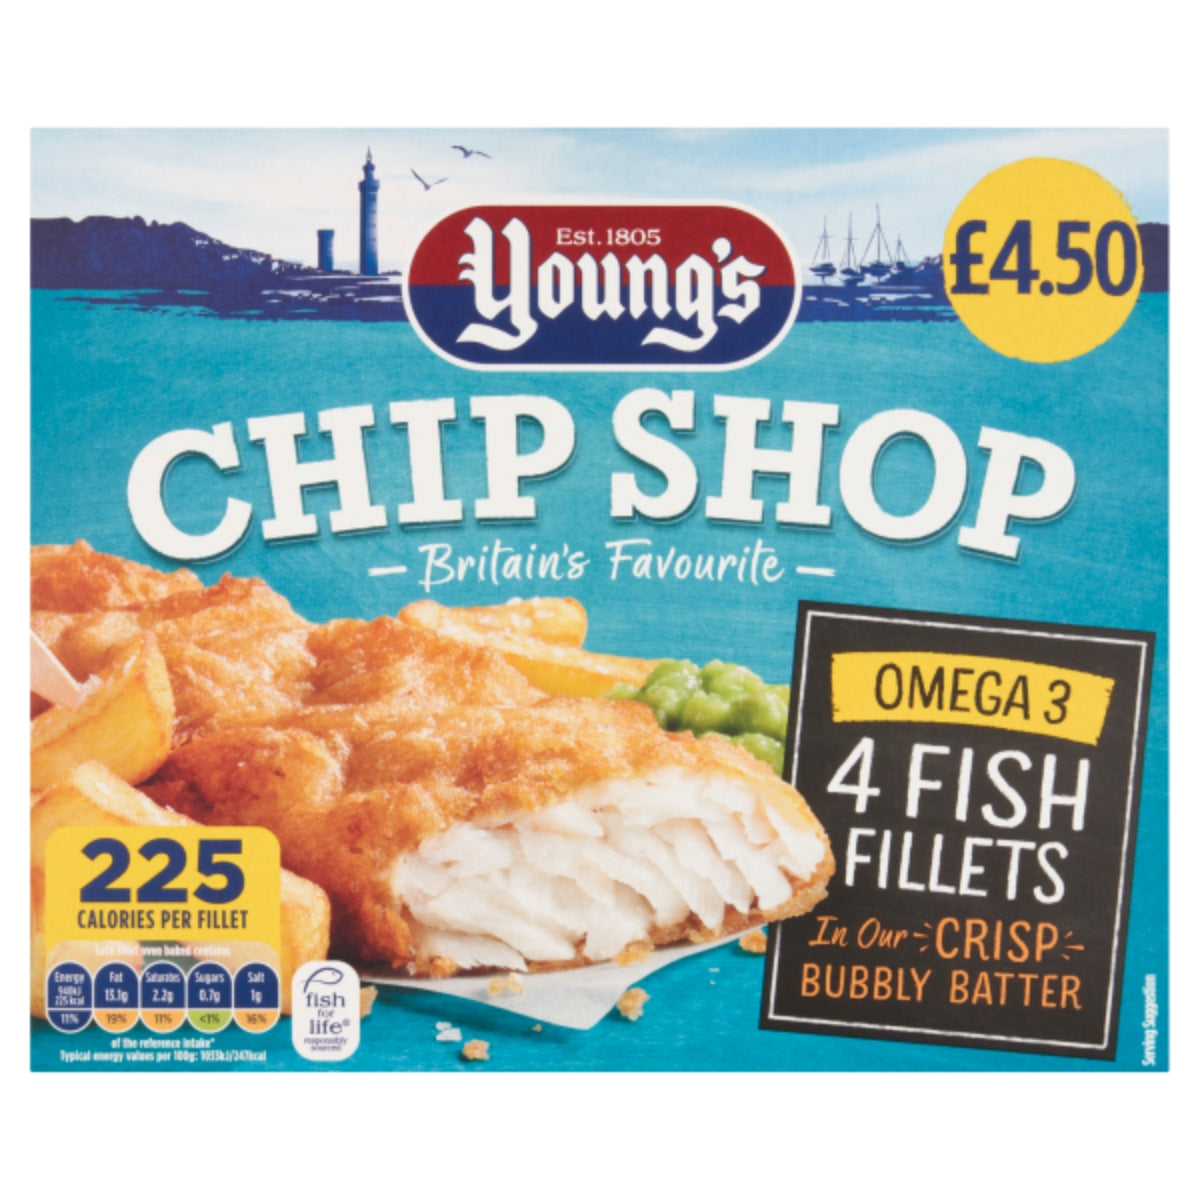 Youngs - Chip Shop Omega 3 4 Fish Fillets - 400g.